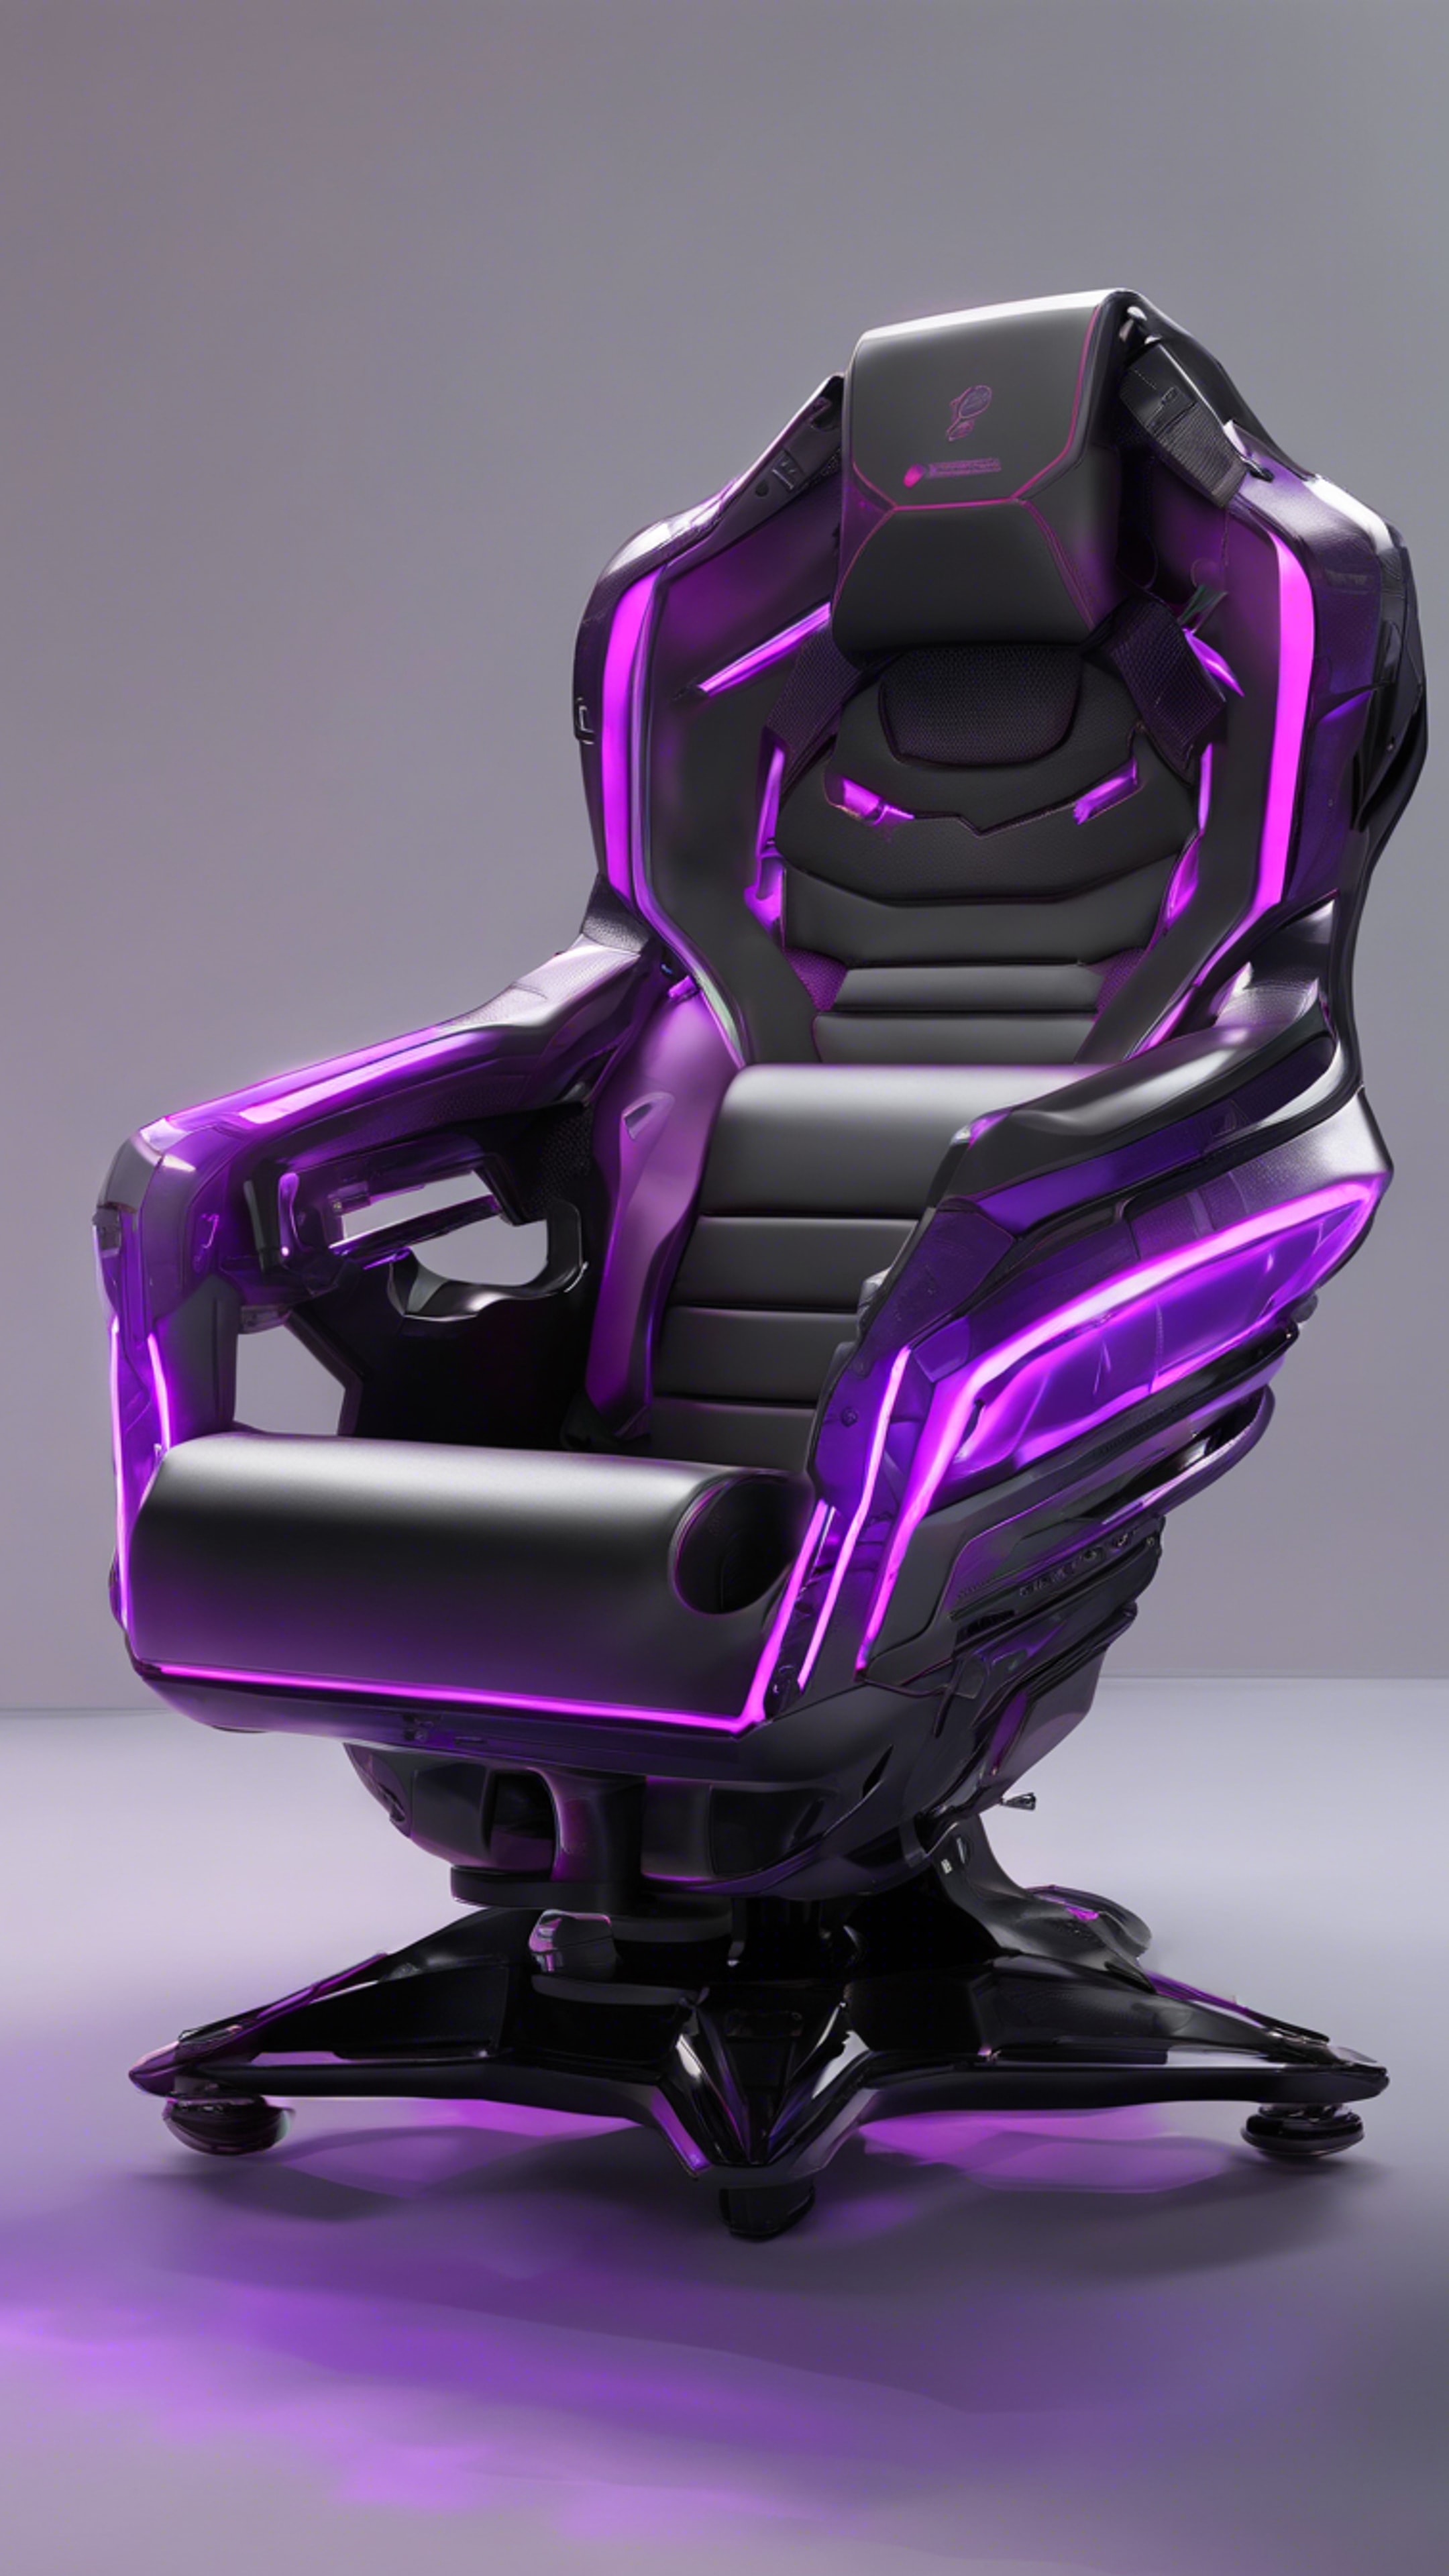 A futuristic gaming chair, jet black with neon purple accents, situated in a high-tech gaming station. Tapeta[77c4183ef08040e08e97]